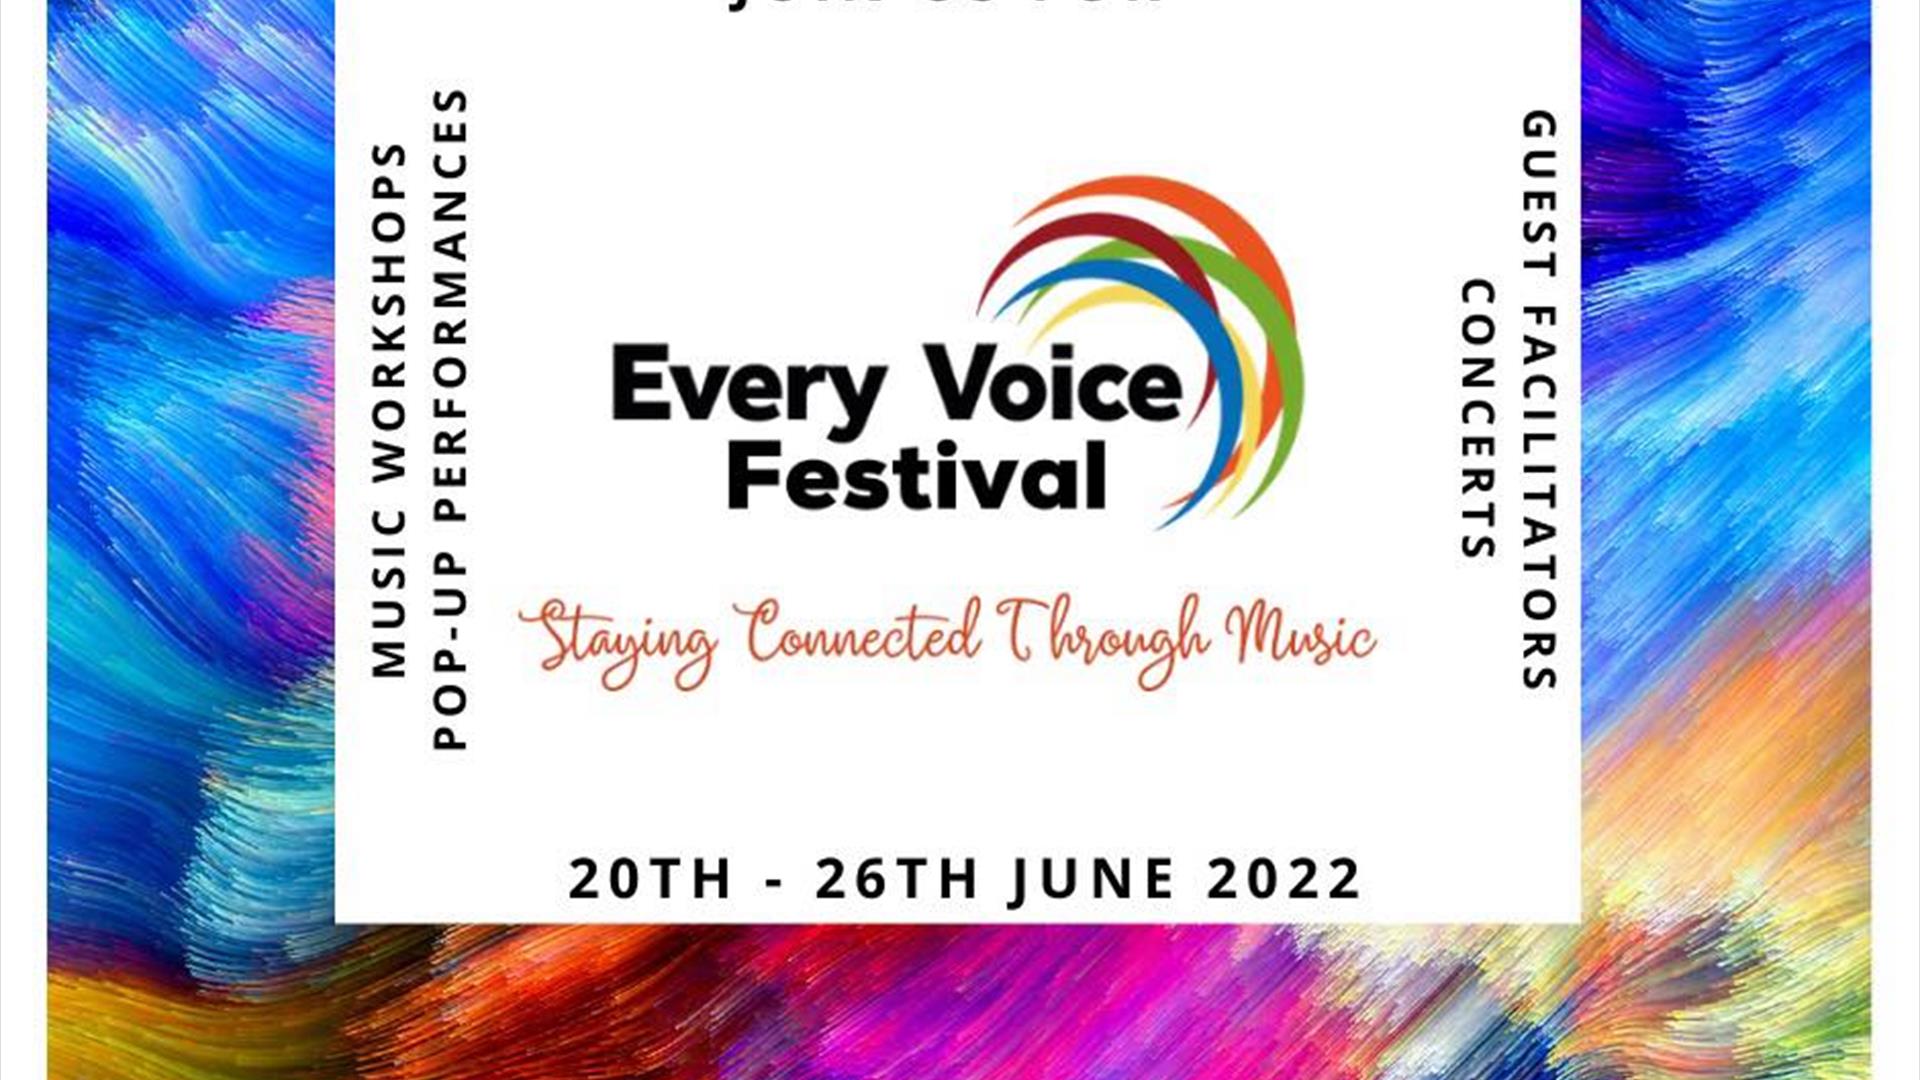 Poster detailing dates for this years Every Voice Festival